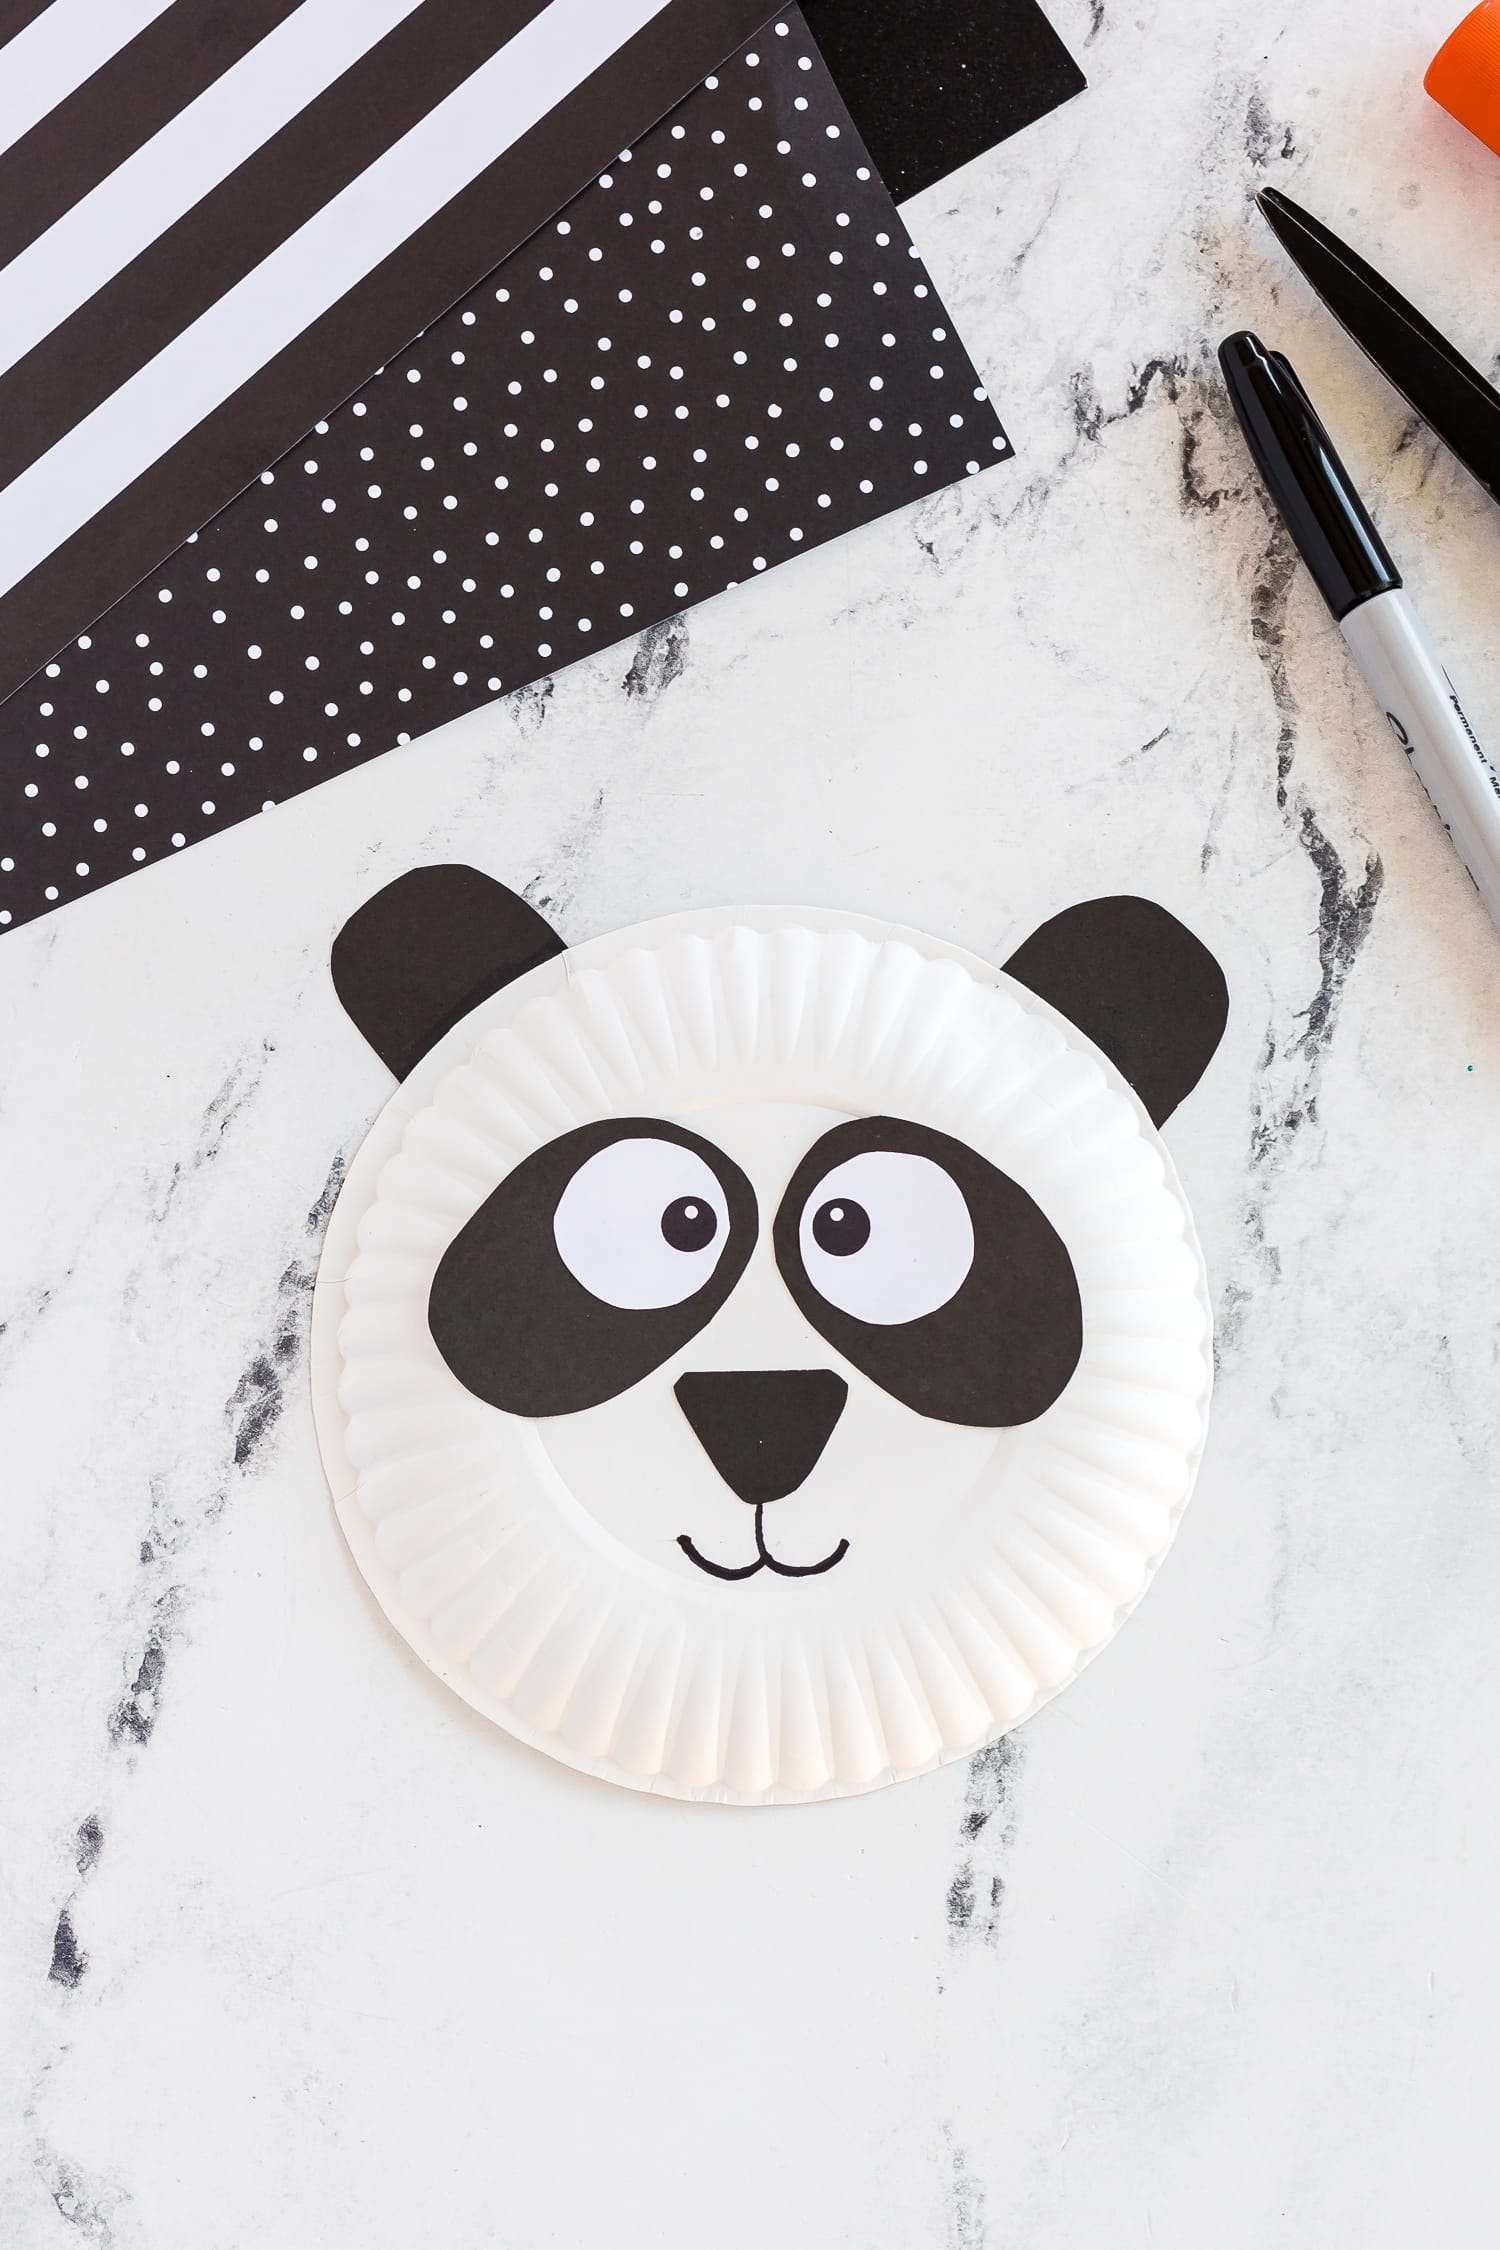 Paper plate panda on counter with black and white paper